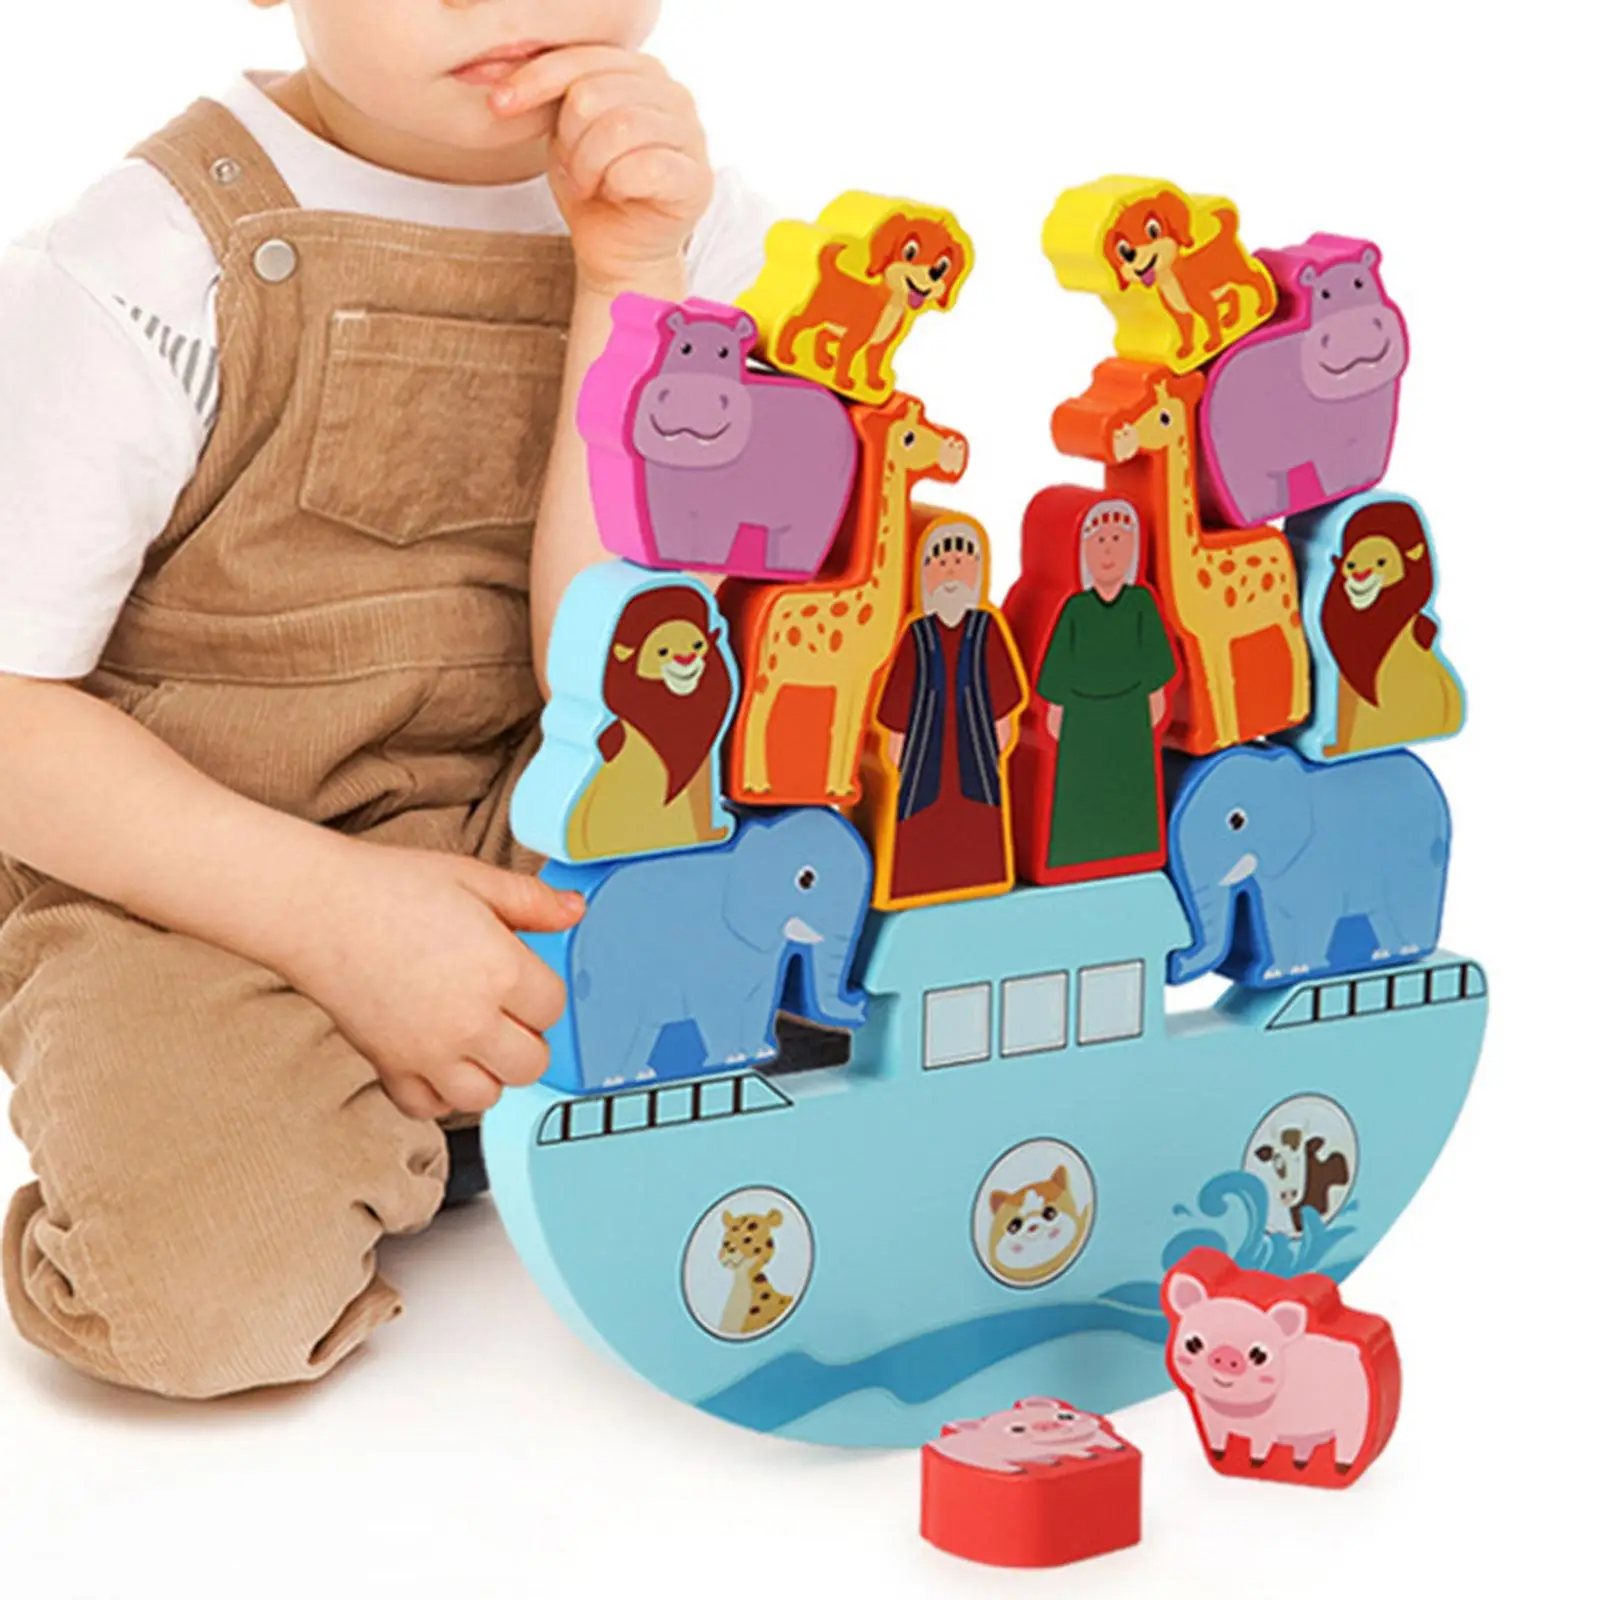 Wooden Balance Game Early Educational Toys for Birthday Gifts